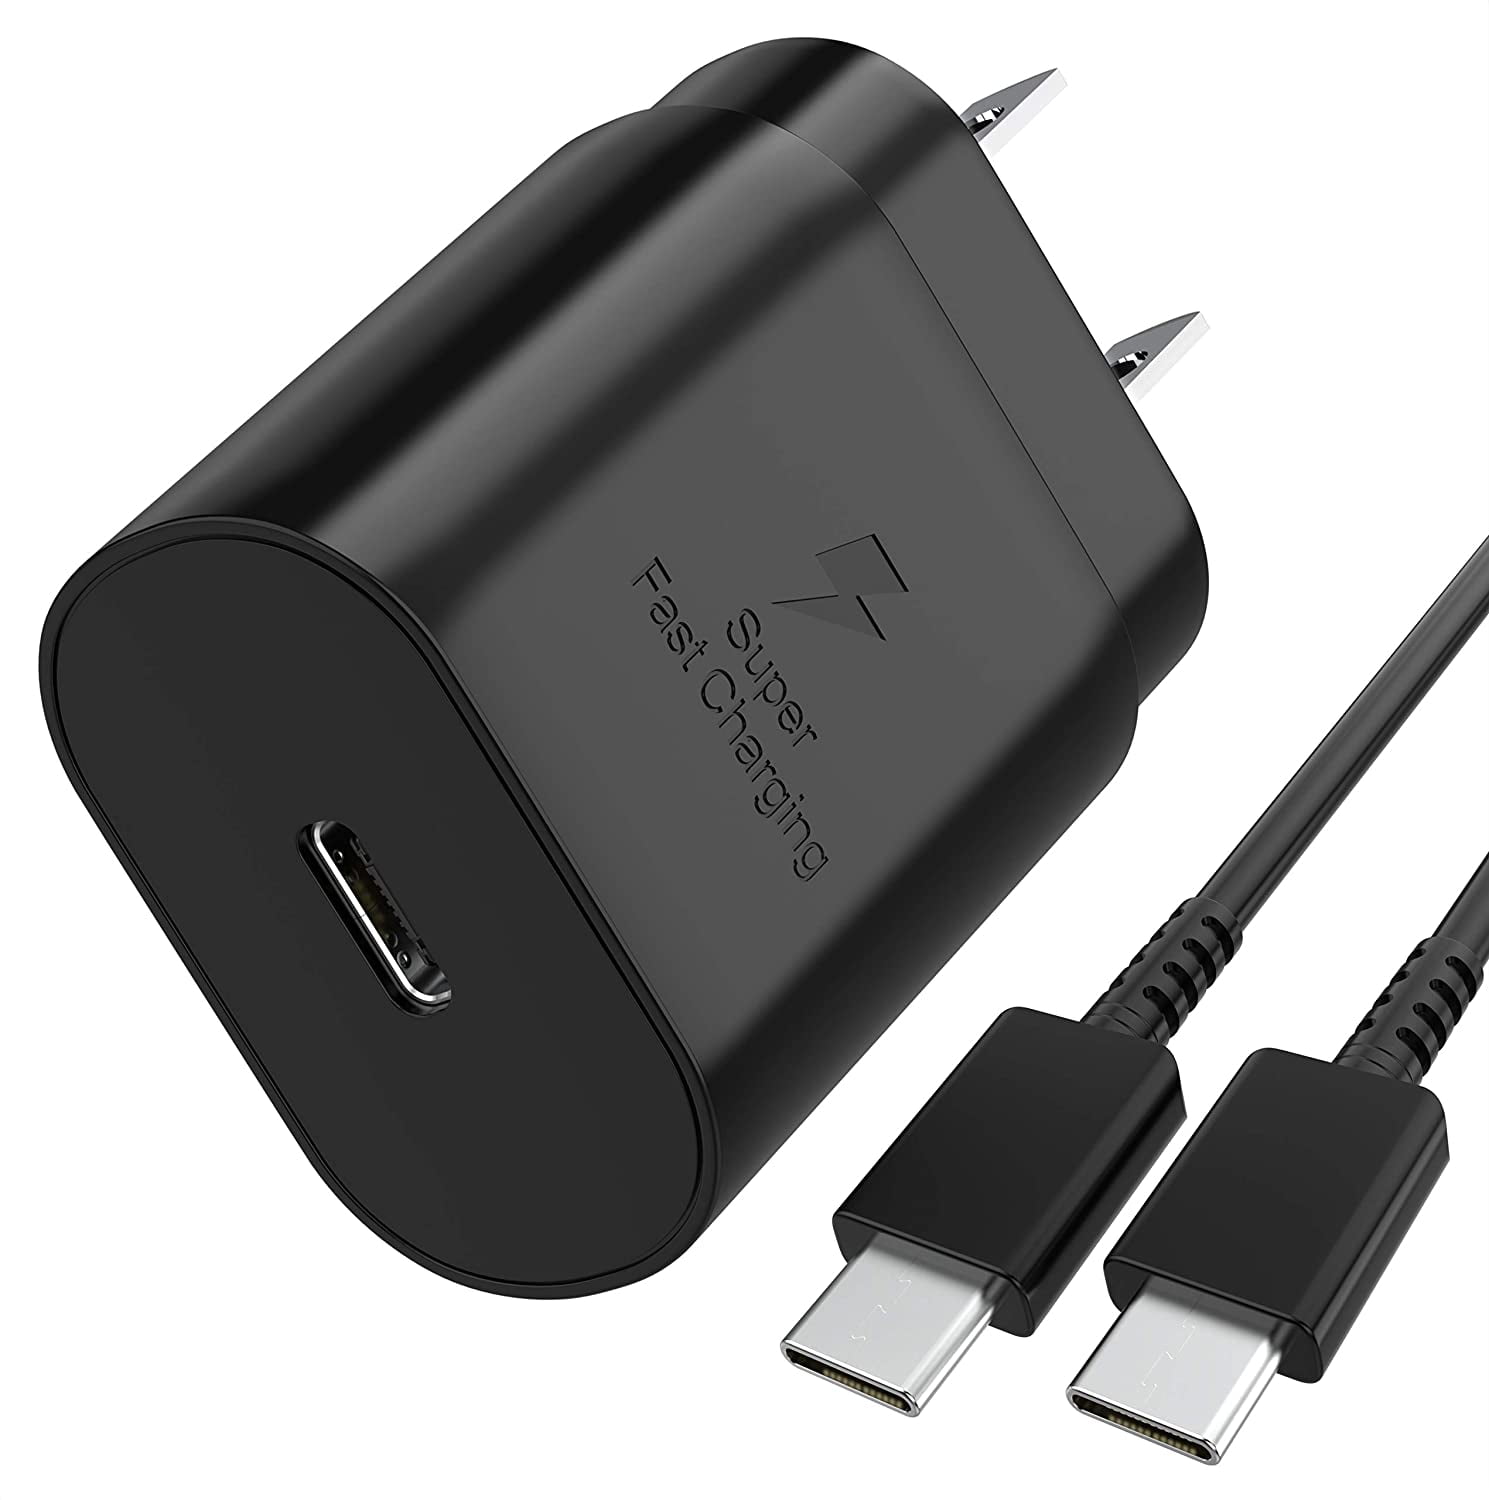 USB Type-C Data Cable 18W. Quick Charging 3.0 KIT Works for Xiaomi Mi 9T Pro Wall Charger Black 